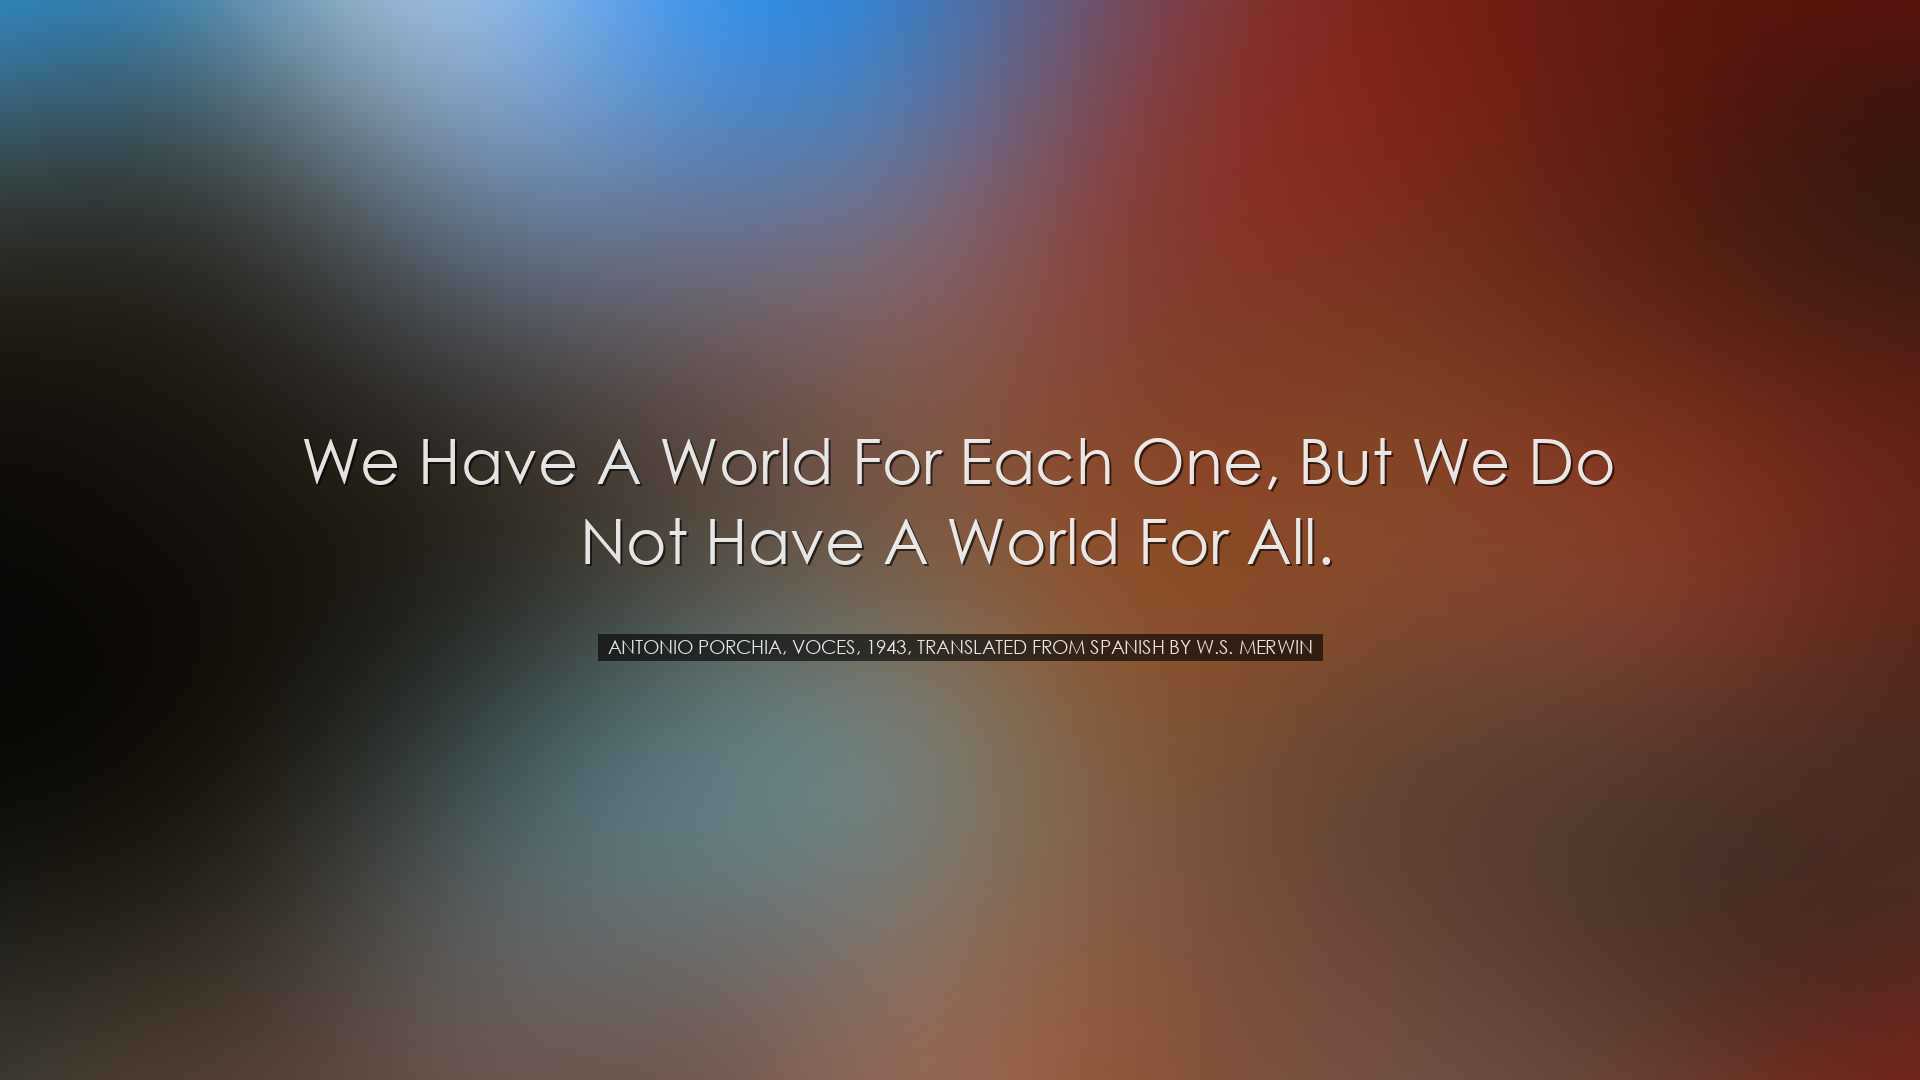 We have a world for each one, but we do not have a world for all.